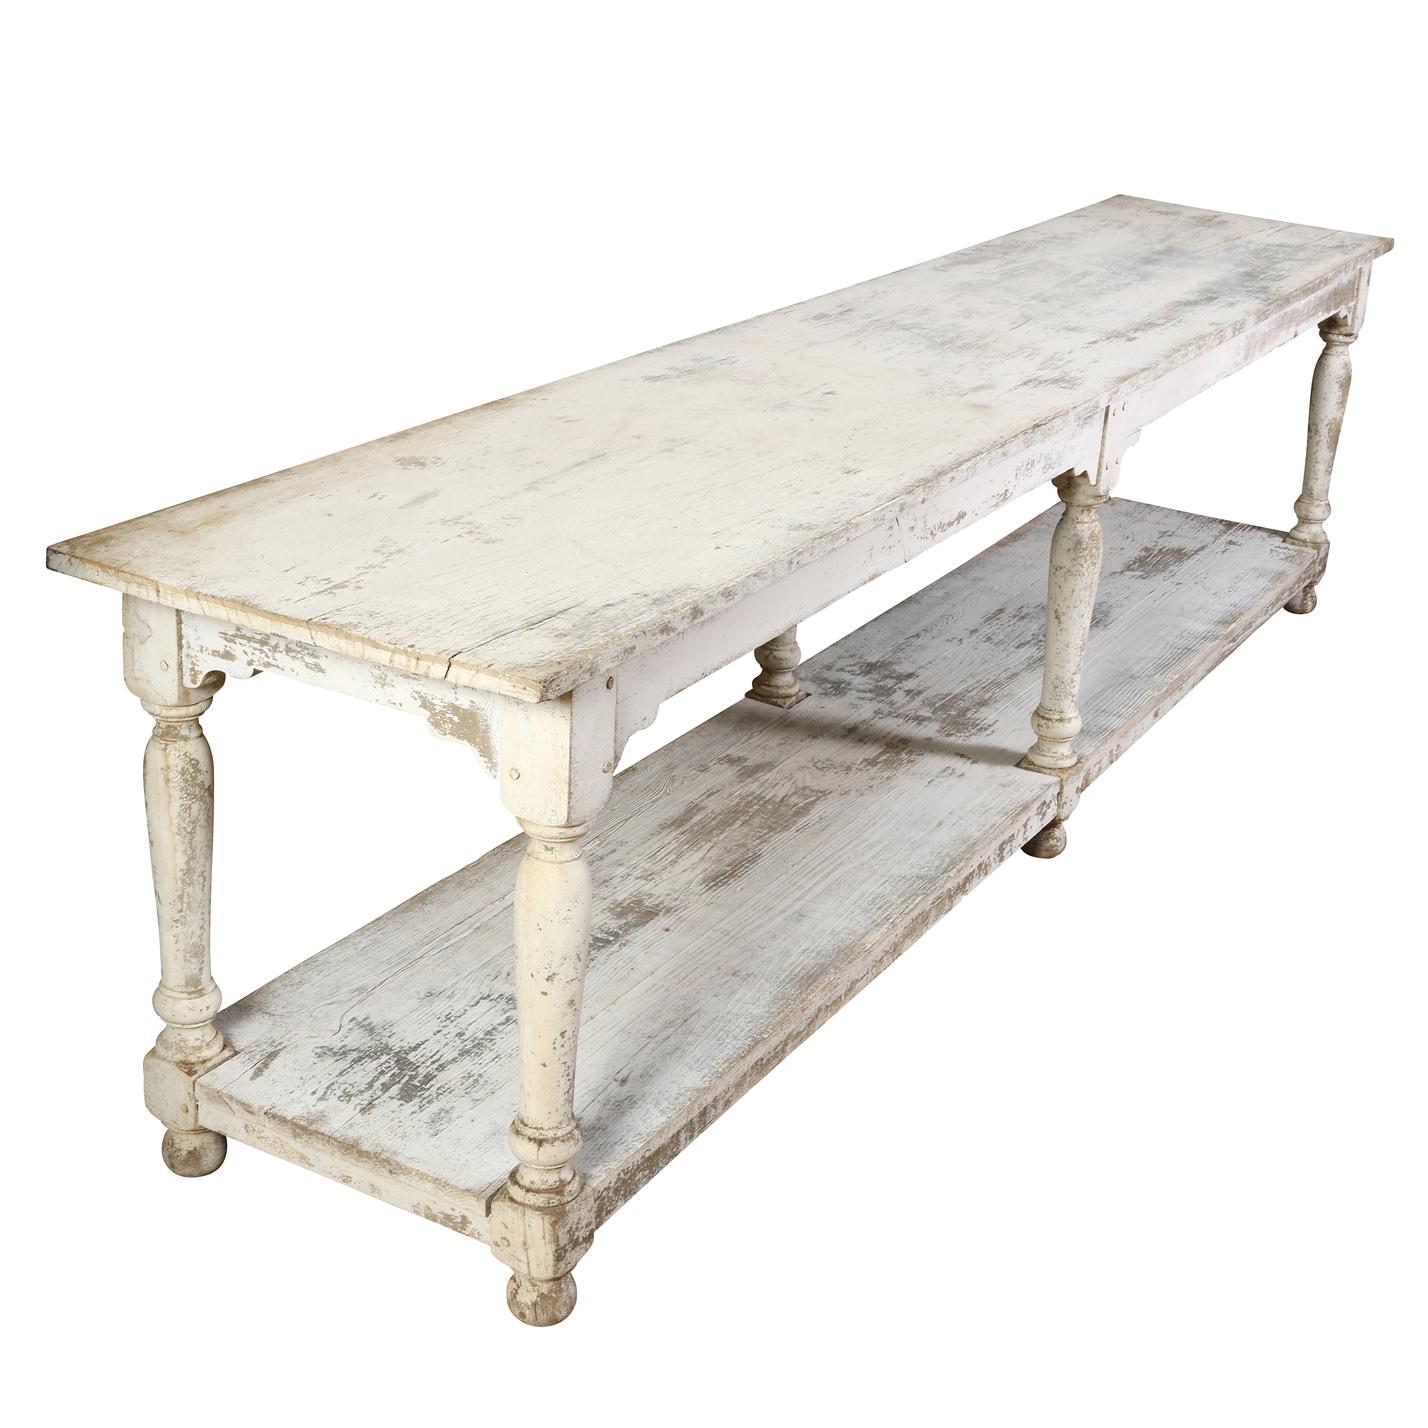 A unique and unusual long painted French drapers table with three tiers.  Originally used for cutting and folding large pieces of fabric, the table can now be used in a multitude of ways–as a console, bar, sideboard or display in a shop or studio. 